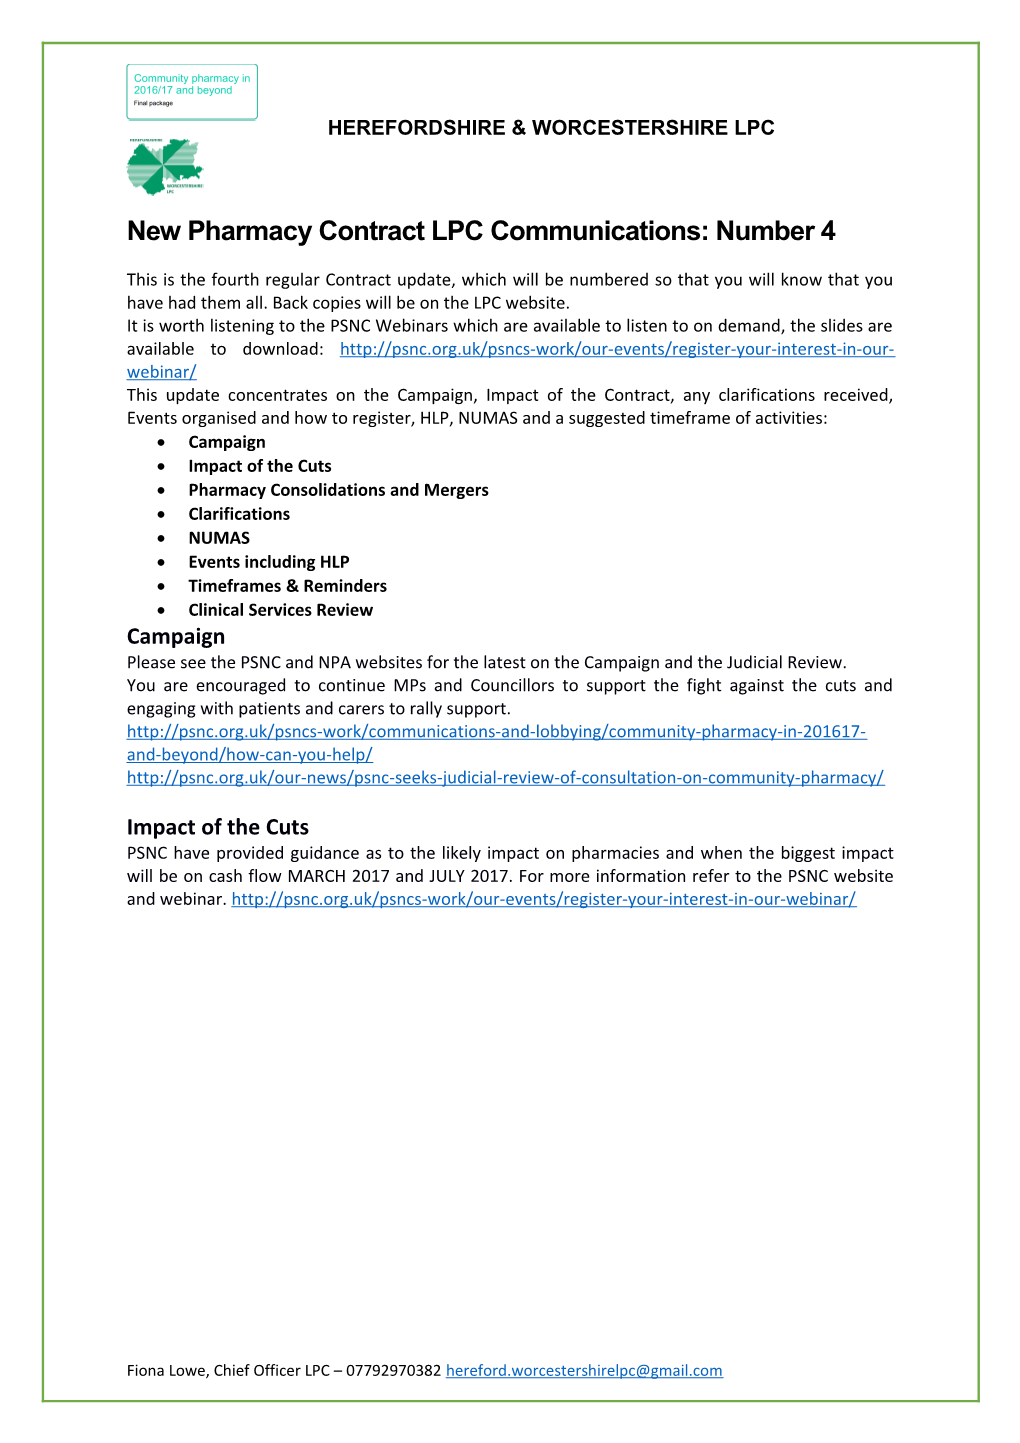 New Pharmacy Contract LPC Communications: Number 4